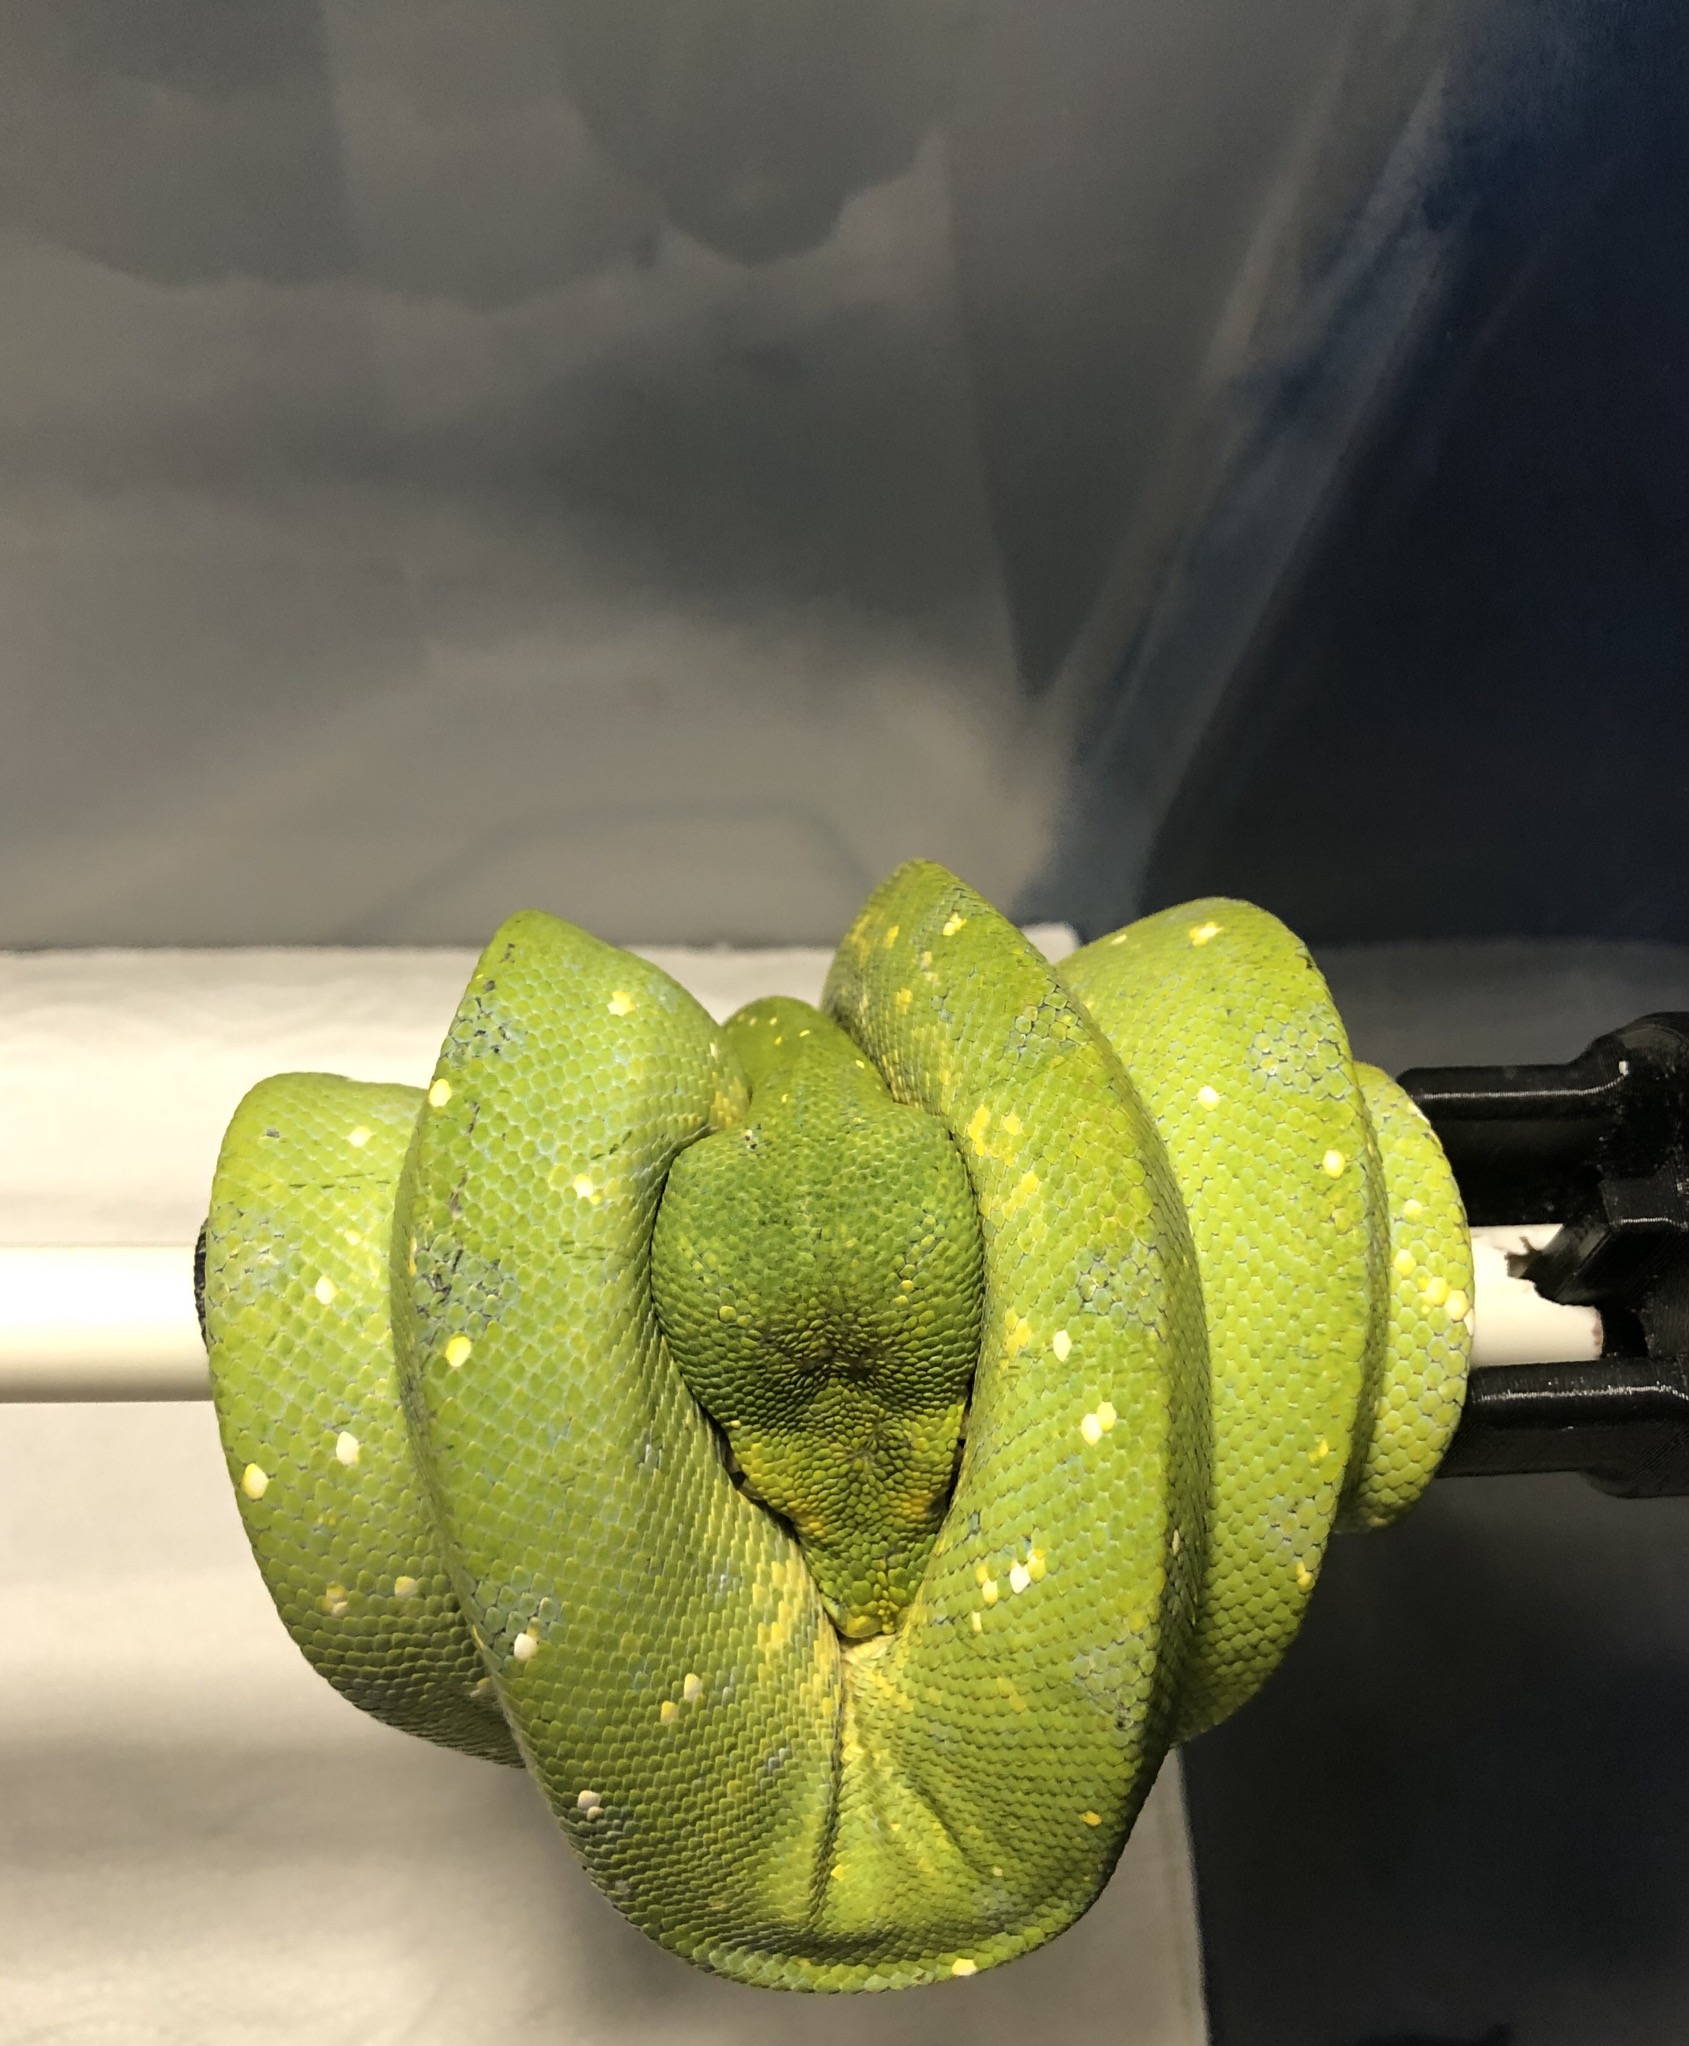 Male Biak Green Tree Python by Mile high chondros